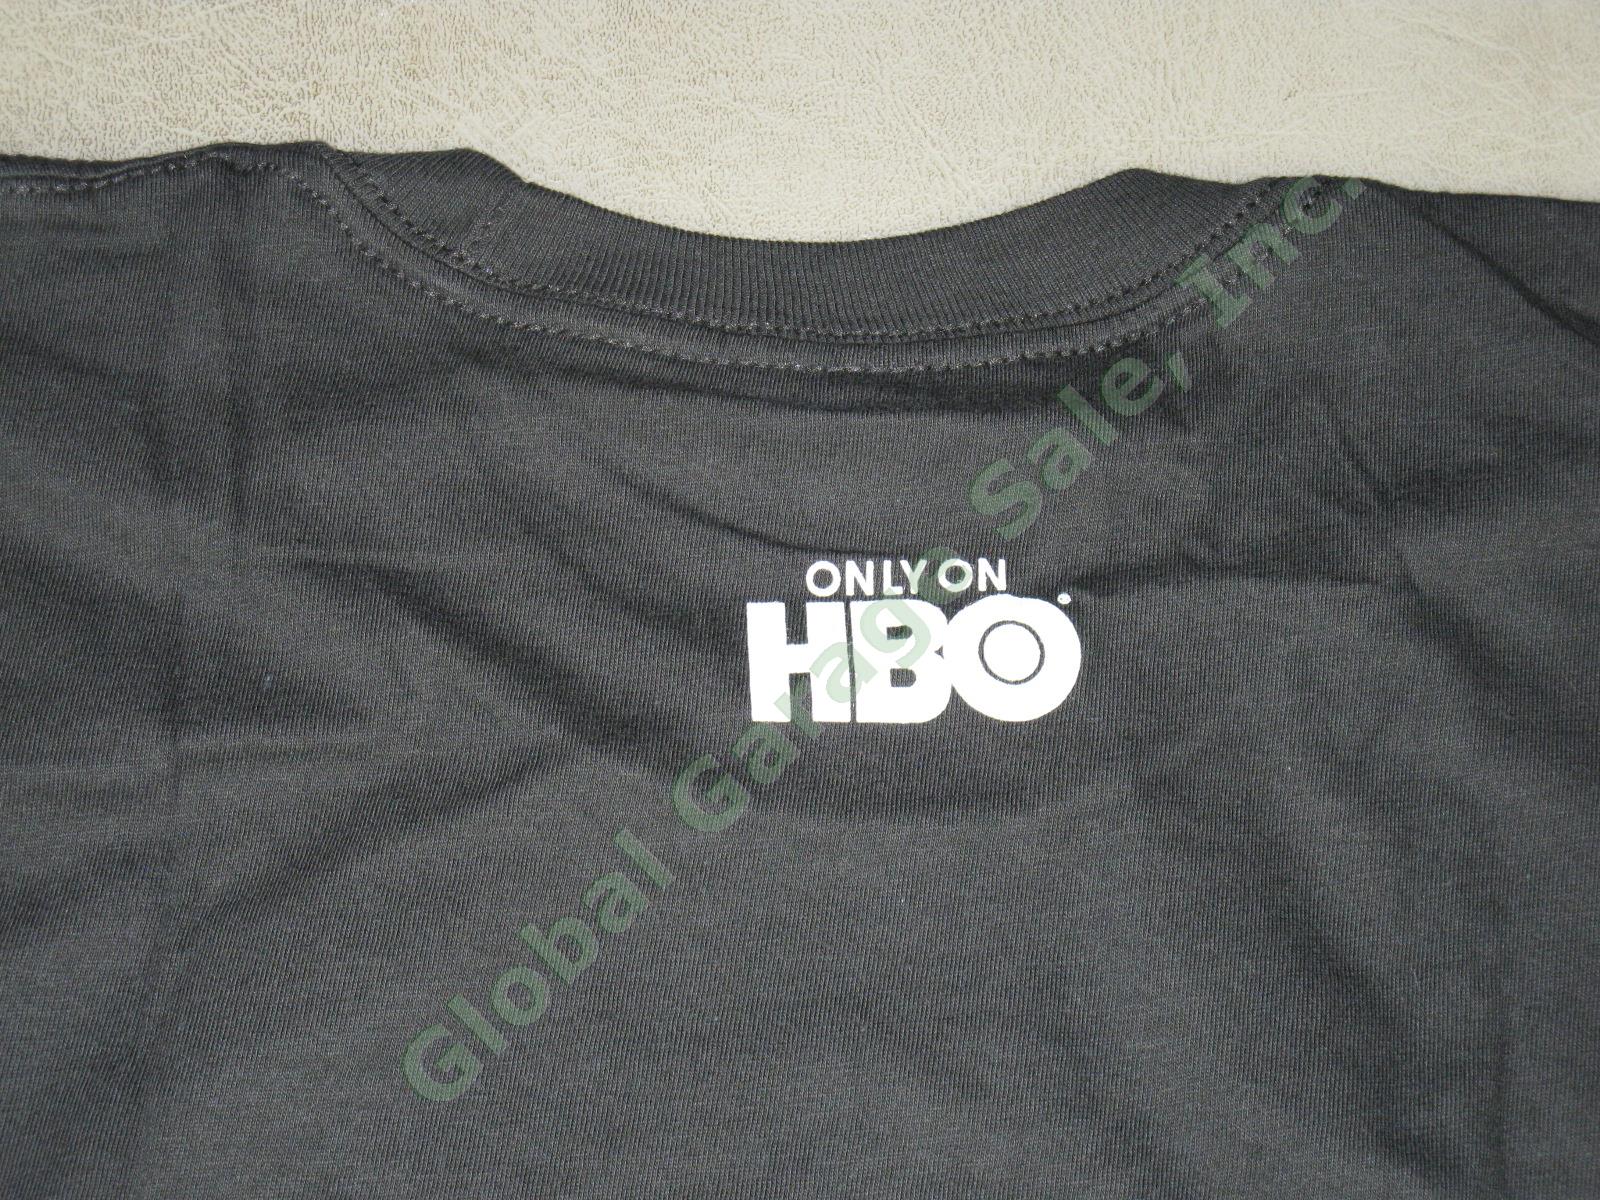 20 RARE Game Of Thrones Winter Is Coming Shirt Lot 2010 San Diego Comic-Con SDCC 2